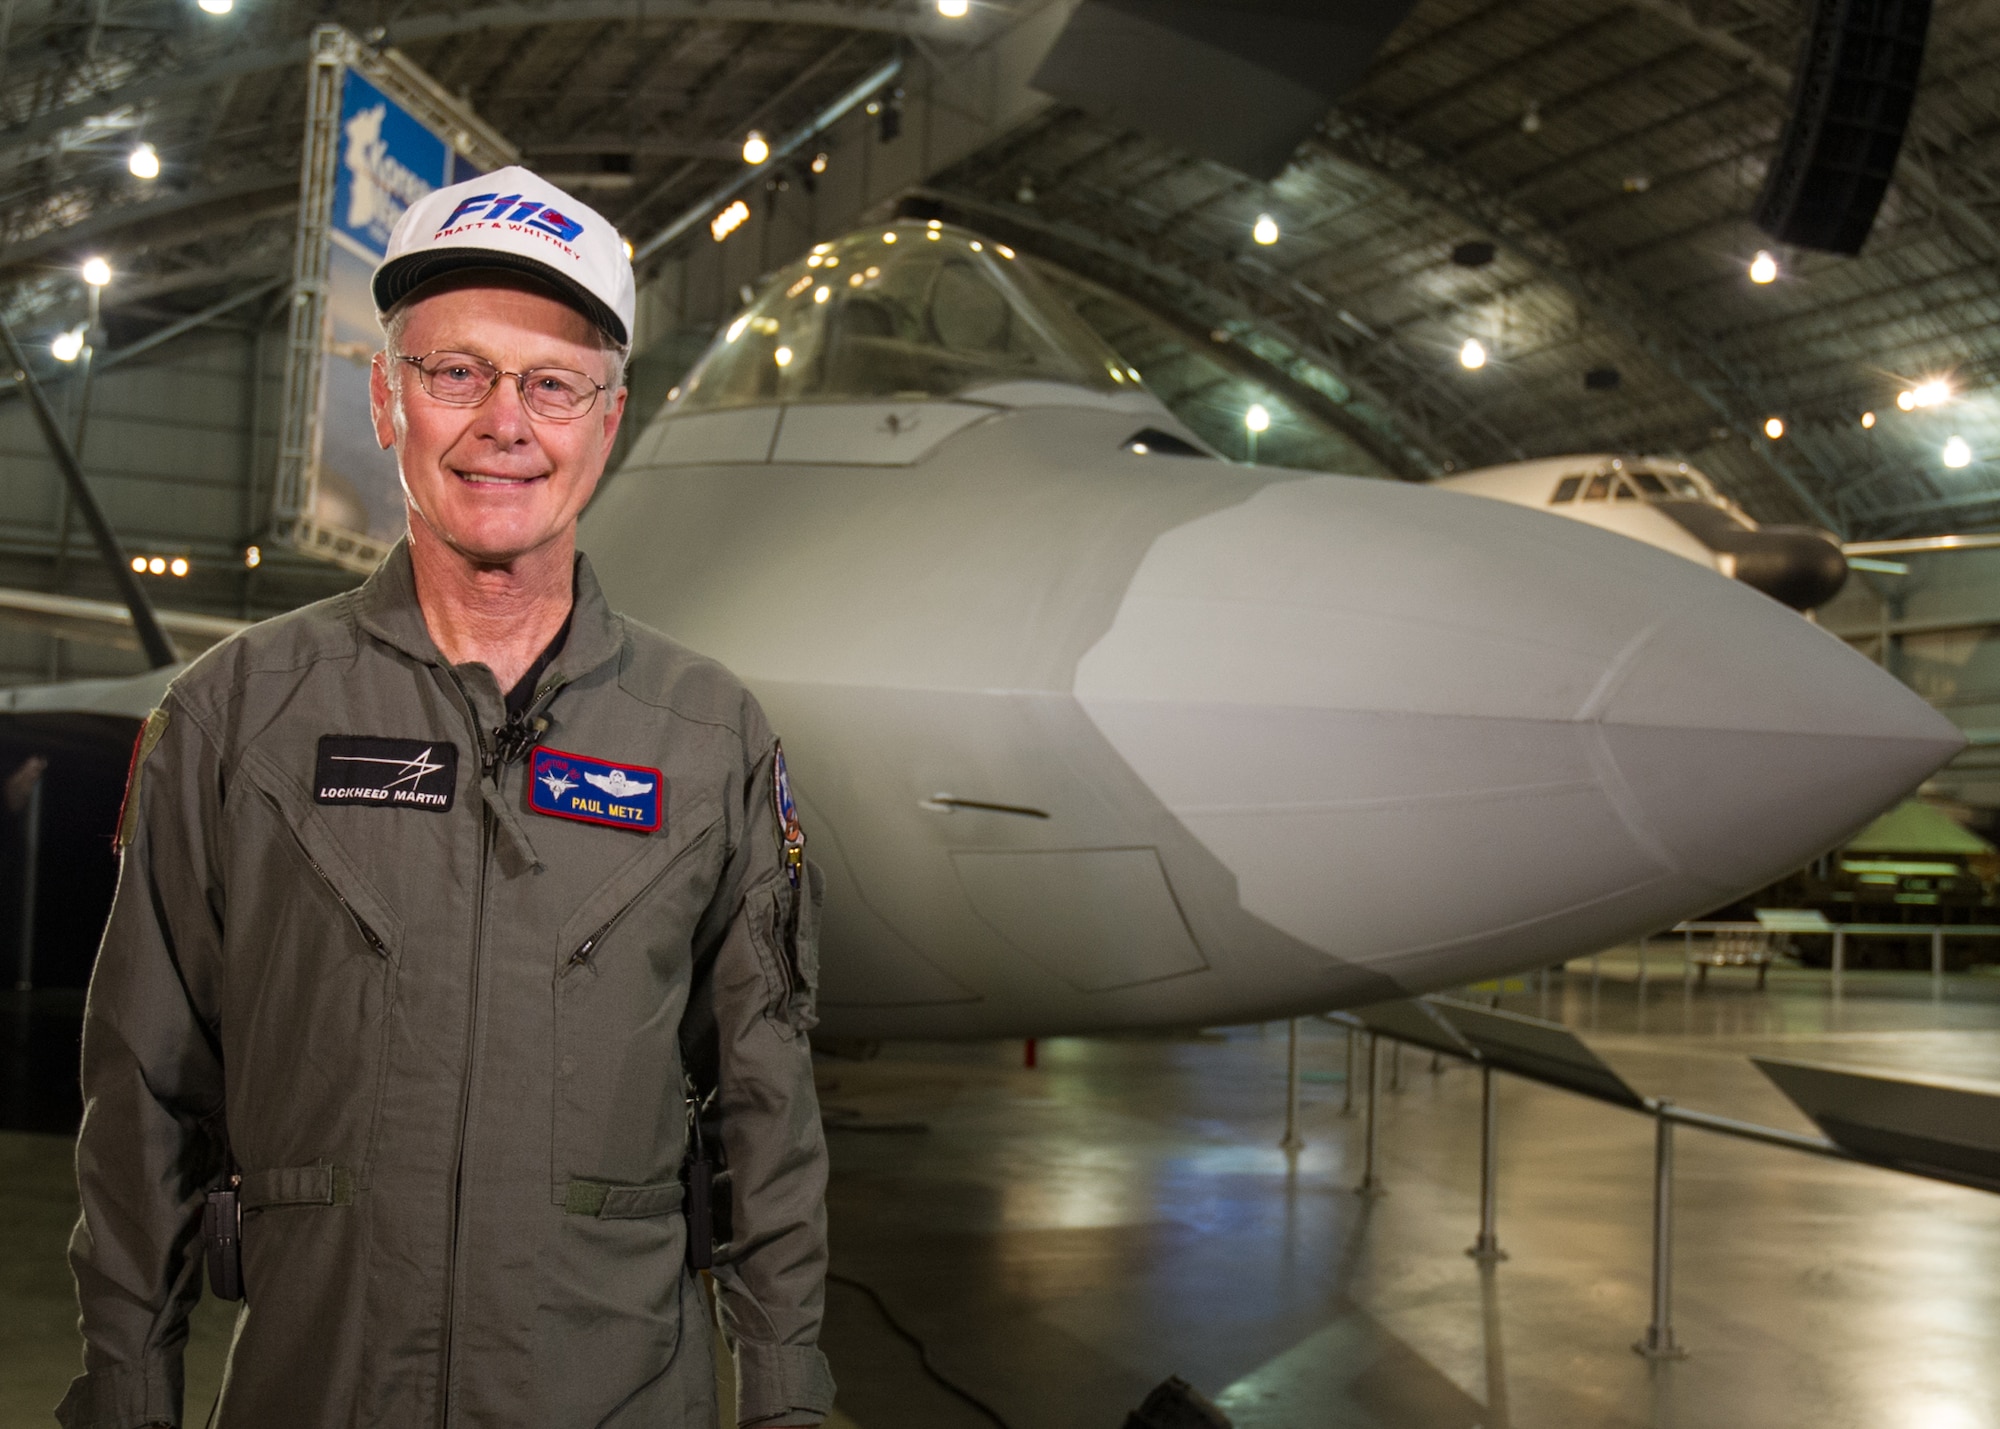 DAYTON, Ohio -- (Dec. 2015) Lockheed Martin test pilot Paul Metz standing in front of the F-22 that he flight tested in 1997. This aircraft is on display at the National Museum of the U.S. Air Force. (U.S. Air Force photo by Ken LaRock)